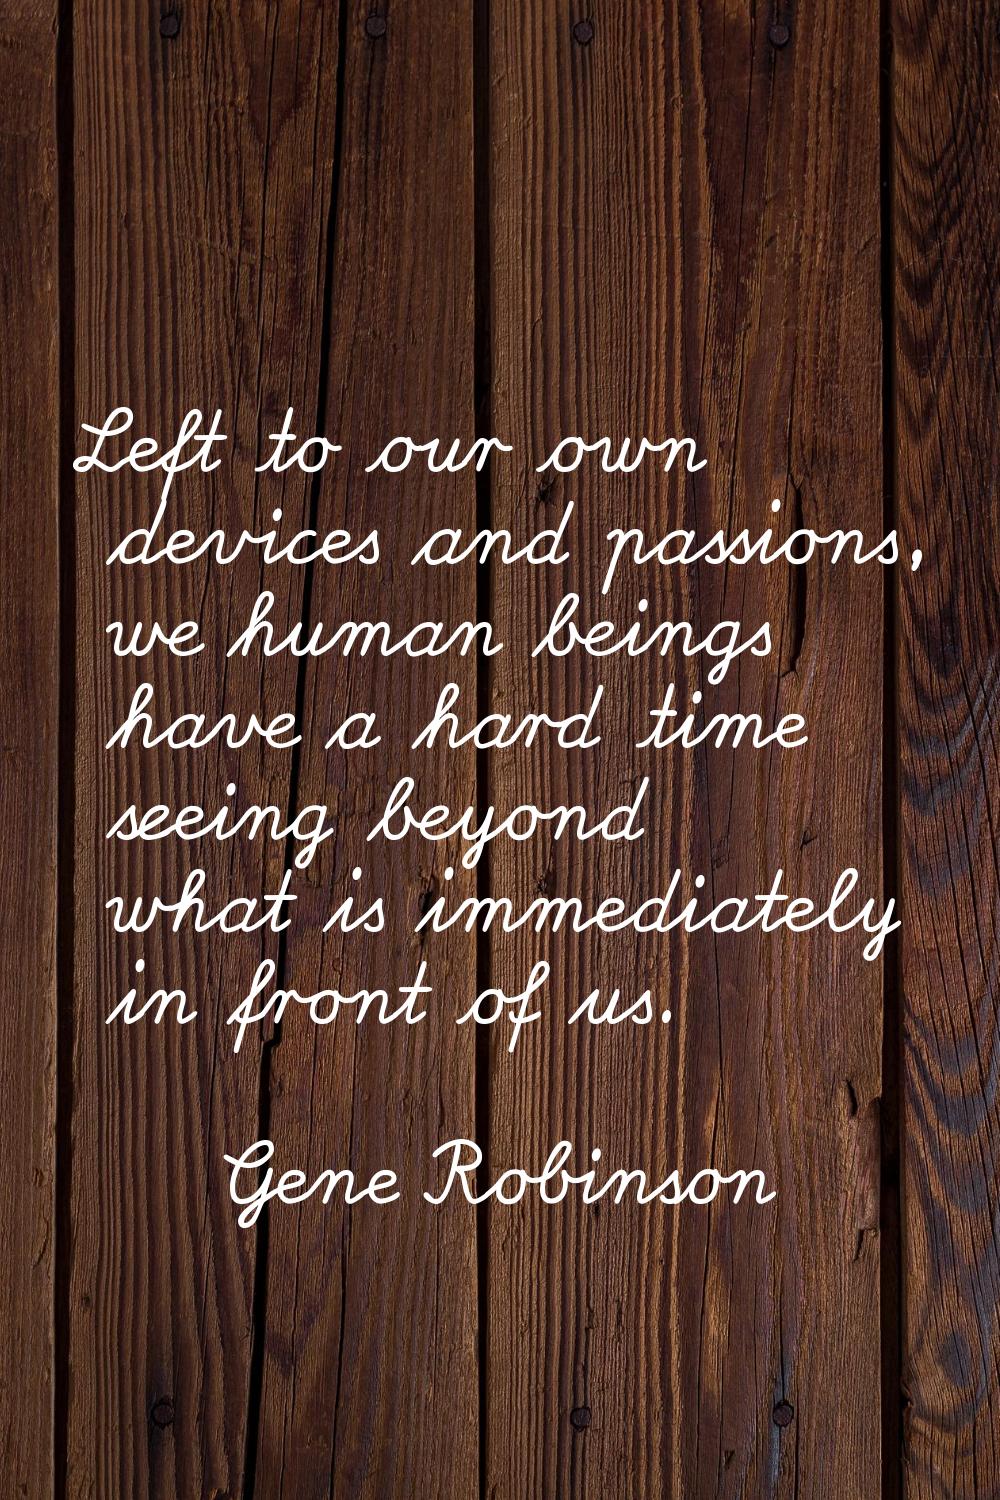 Left to our own devices and passions, we human beings have a hard time seeing beyond what is immedi